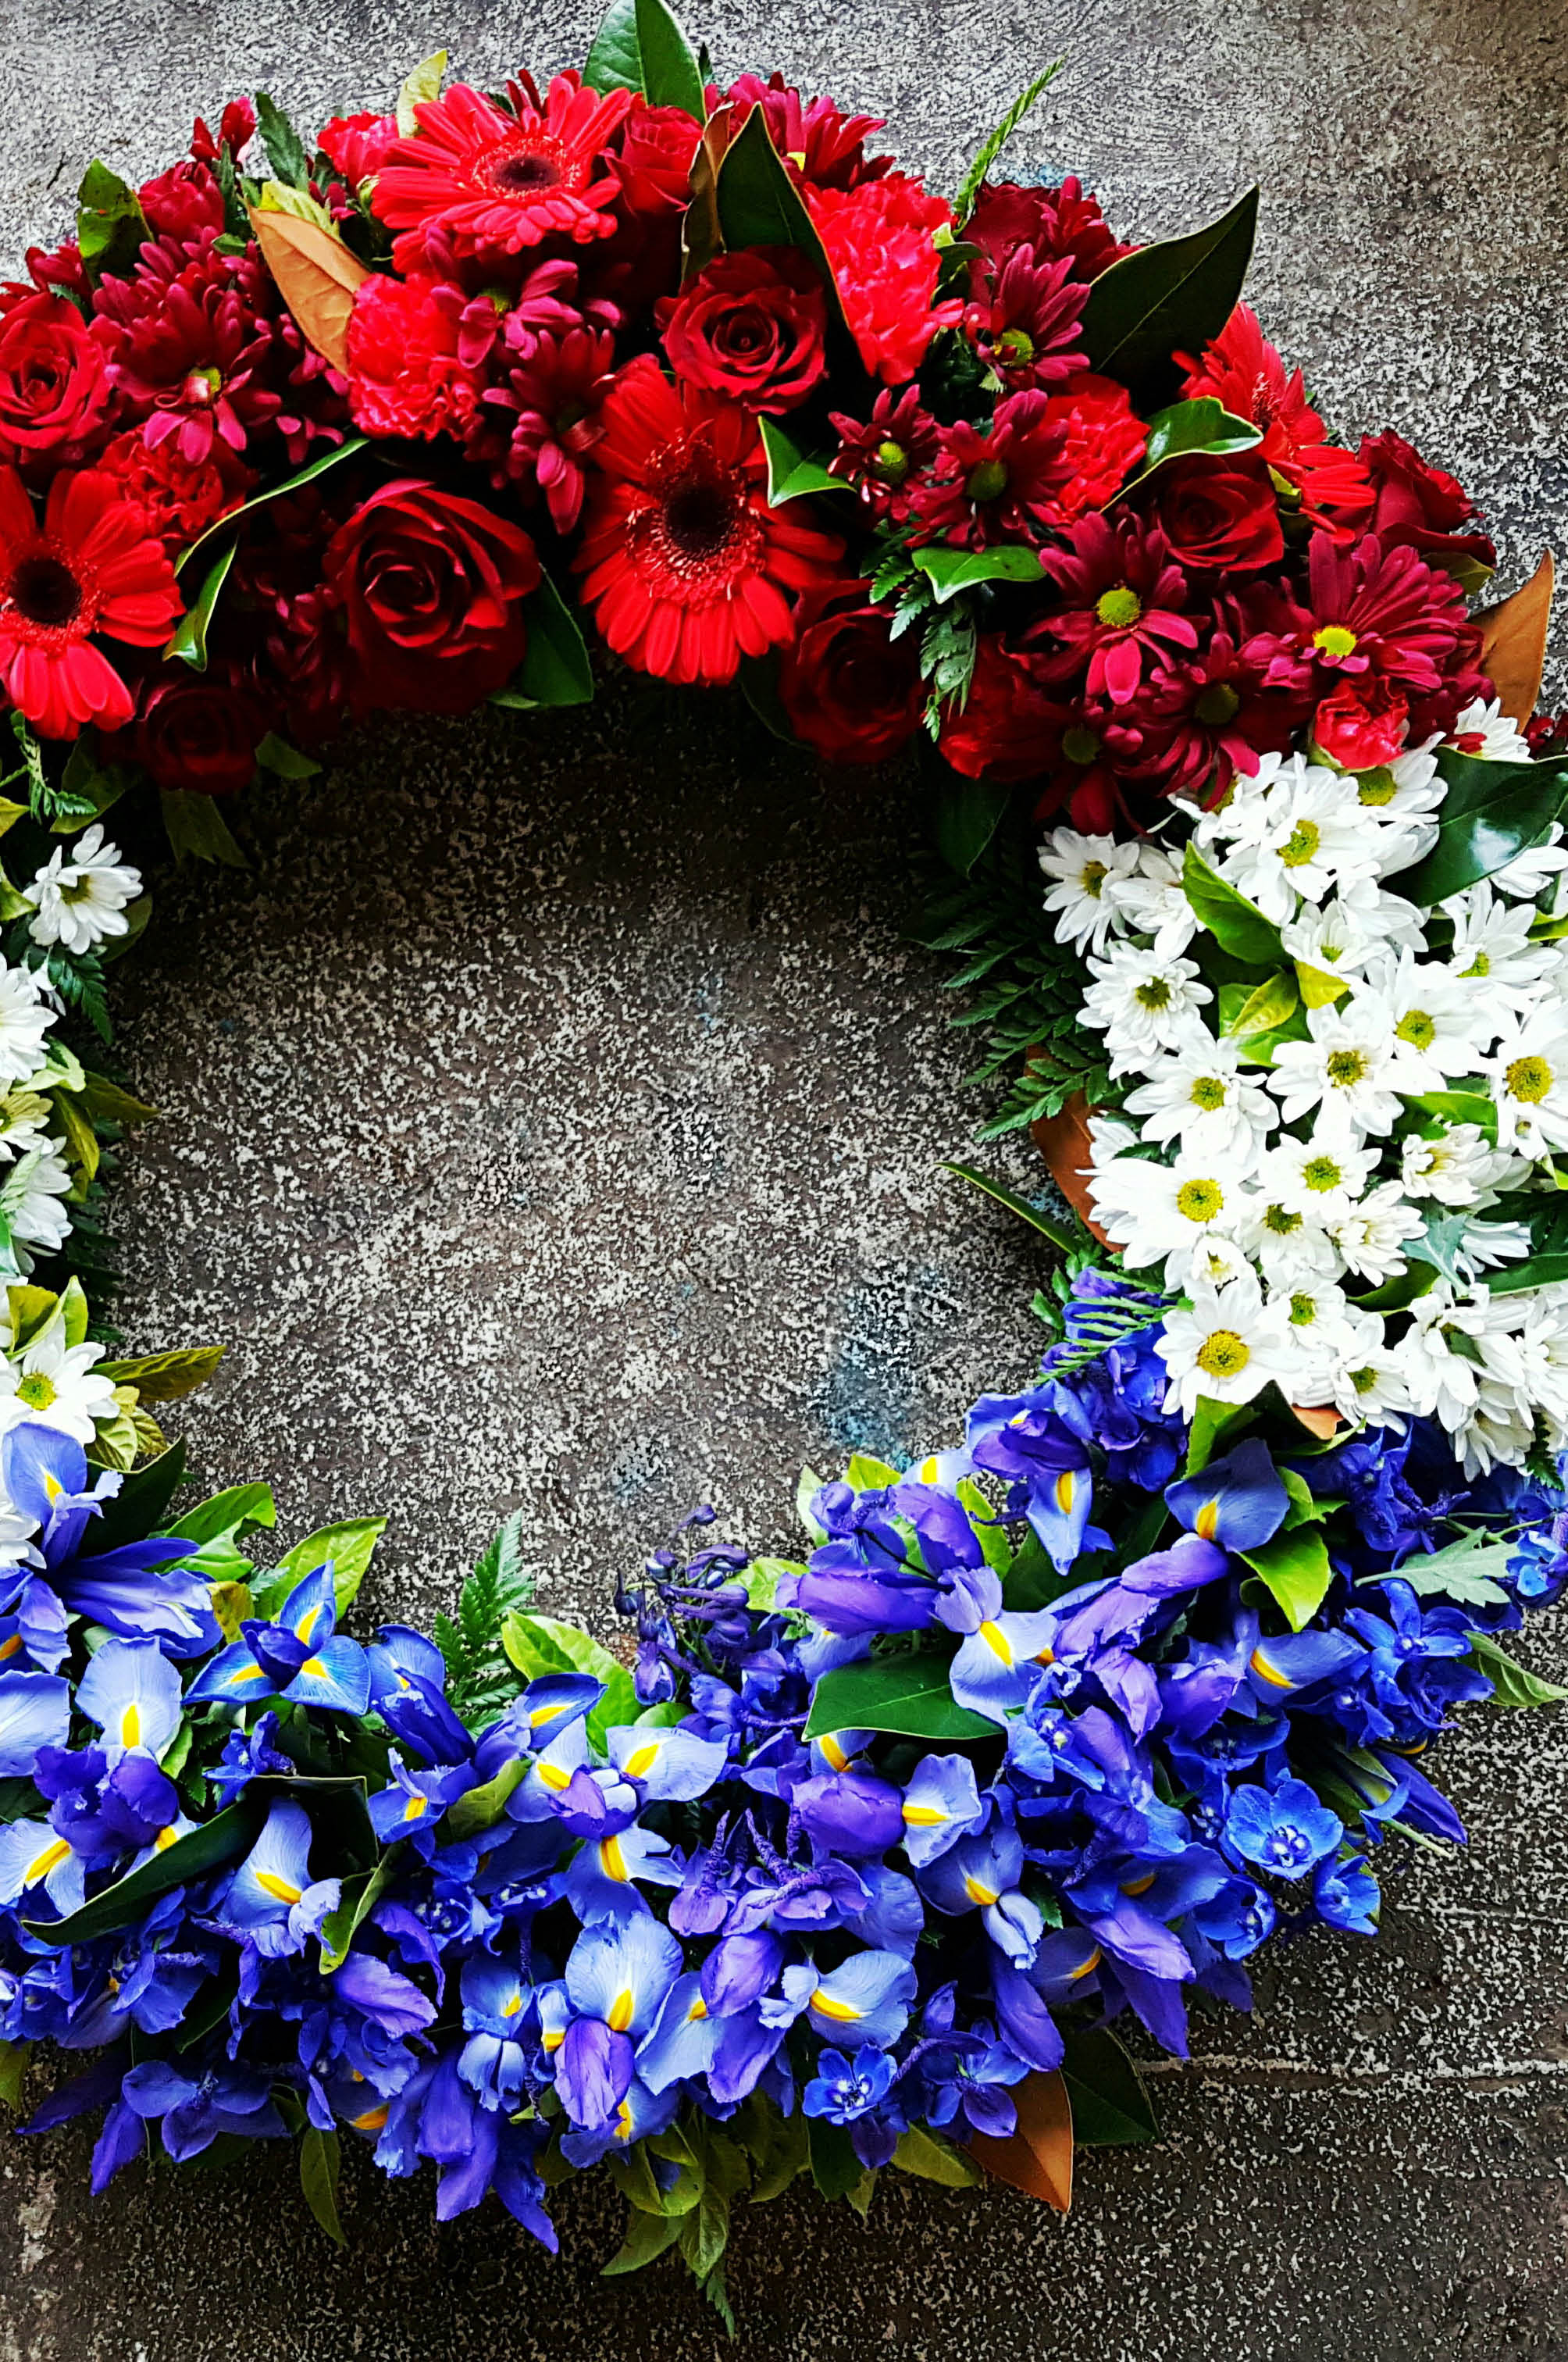 Floral Tribute Wreath In Red White And Blue